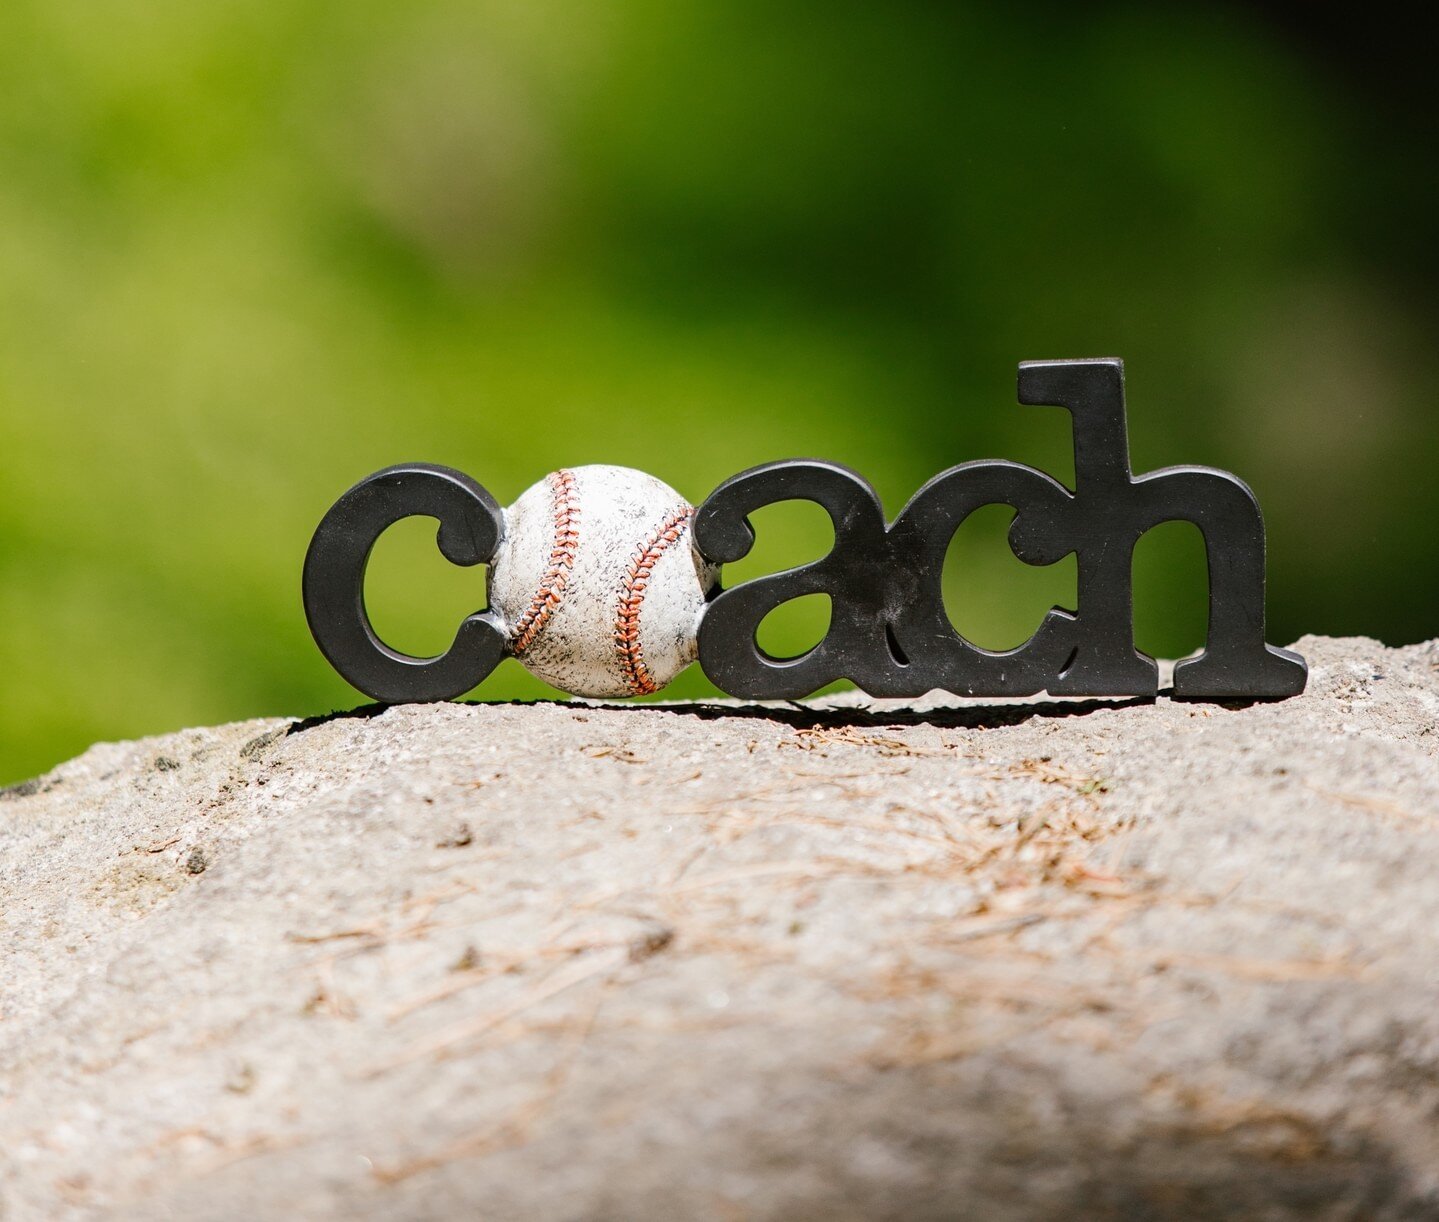 Blog Excerpt: Coaching Handbook: Lessons Learned⁠
⁠
A good coach can change a game.  A great coach can change a life. &ndash; John Wooden⁠
⁠
I had great success as a coach only because I learned from great coaches that I was fortunate to work with.⁠
